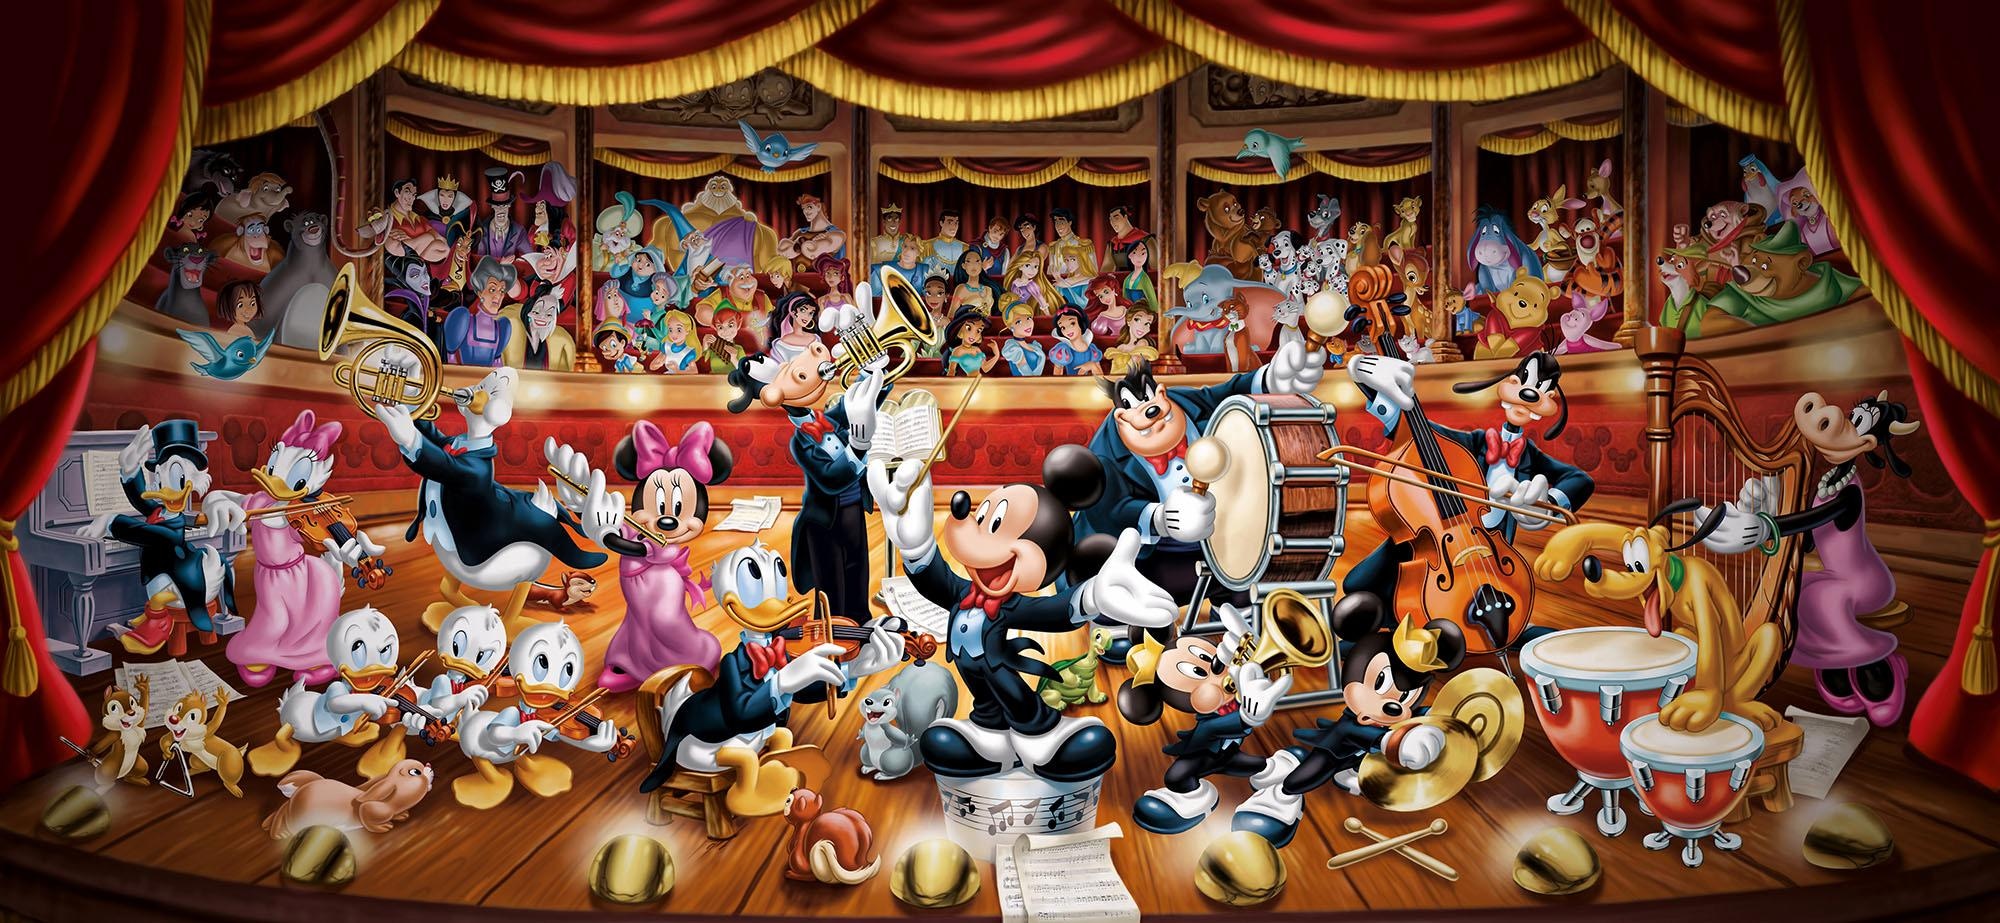 Puzzle »Panorama High Quality Collection, Disney Orchester«, Made in Europe